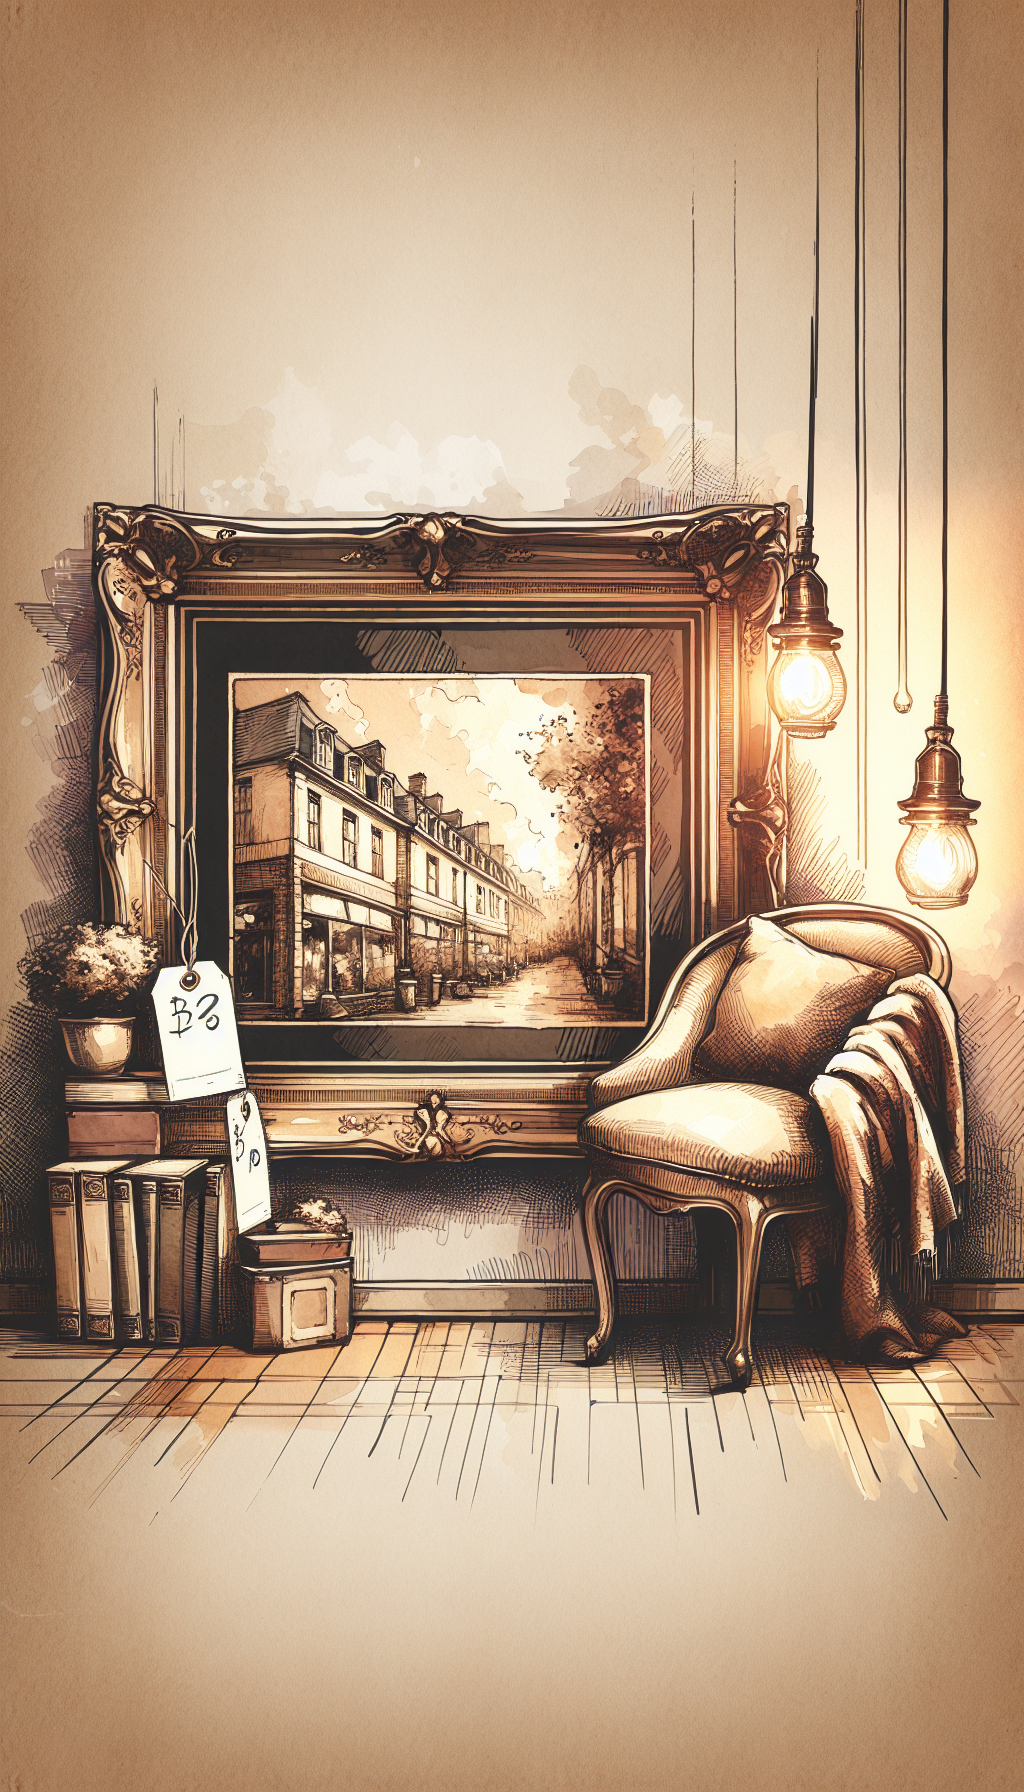 An illustration of a cozy room corner, adorned with an ornate vintage frame showcasing an old sepia-toned streetscape, commands attention amongst mid-century furniture. The frame is backlit, casting a warm glow, while art auction price tags dangle discreetly from the picture, symbolizing the hidden value of classic interior images. The scene merges watercolor warmth with crisp ink lines, marrying past elegance with present worth.